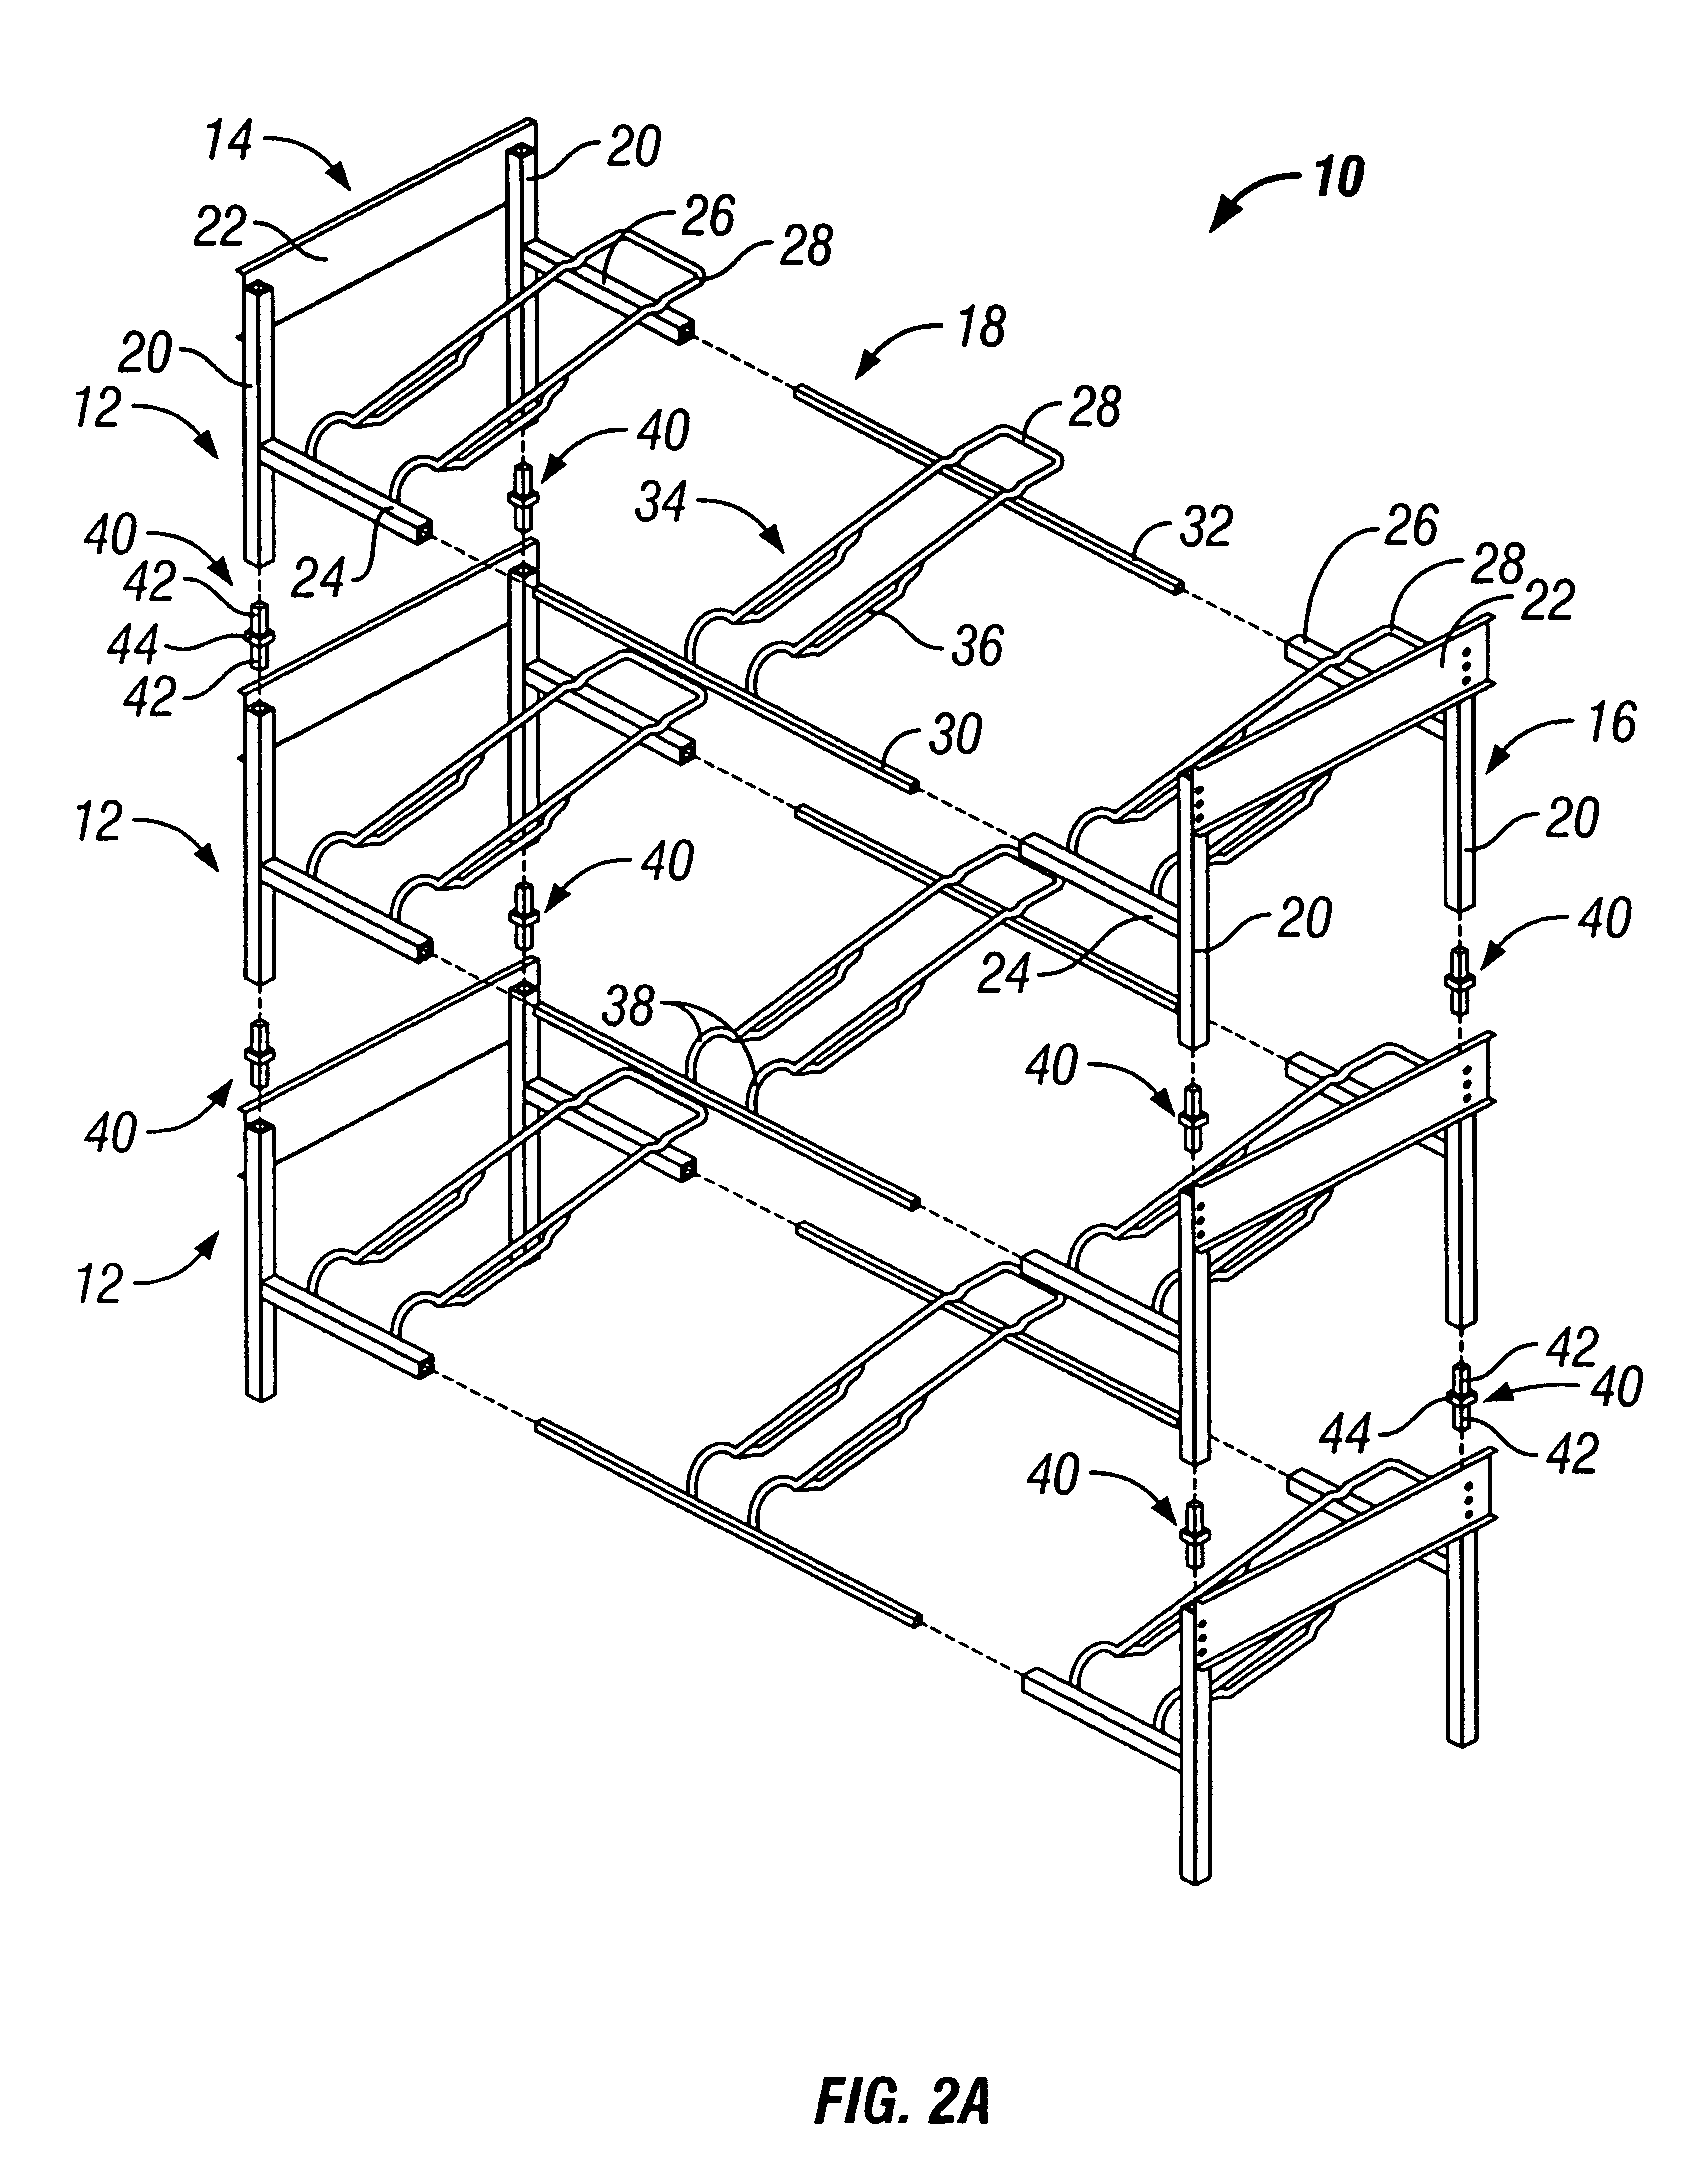 Comestible fluid rack and rail apparatus and method